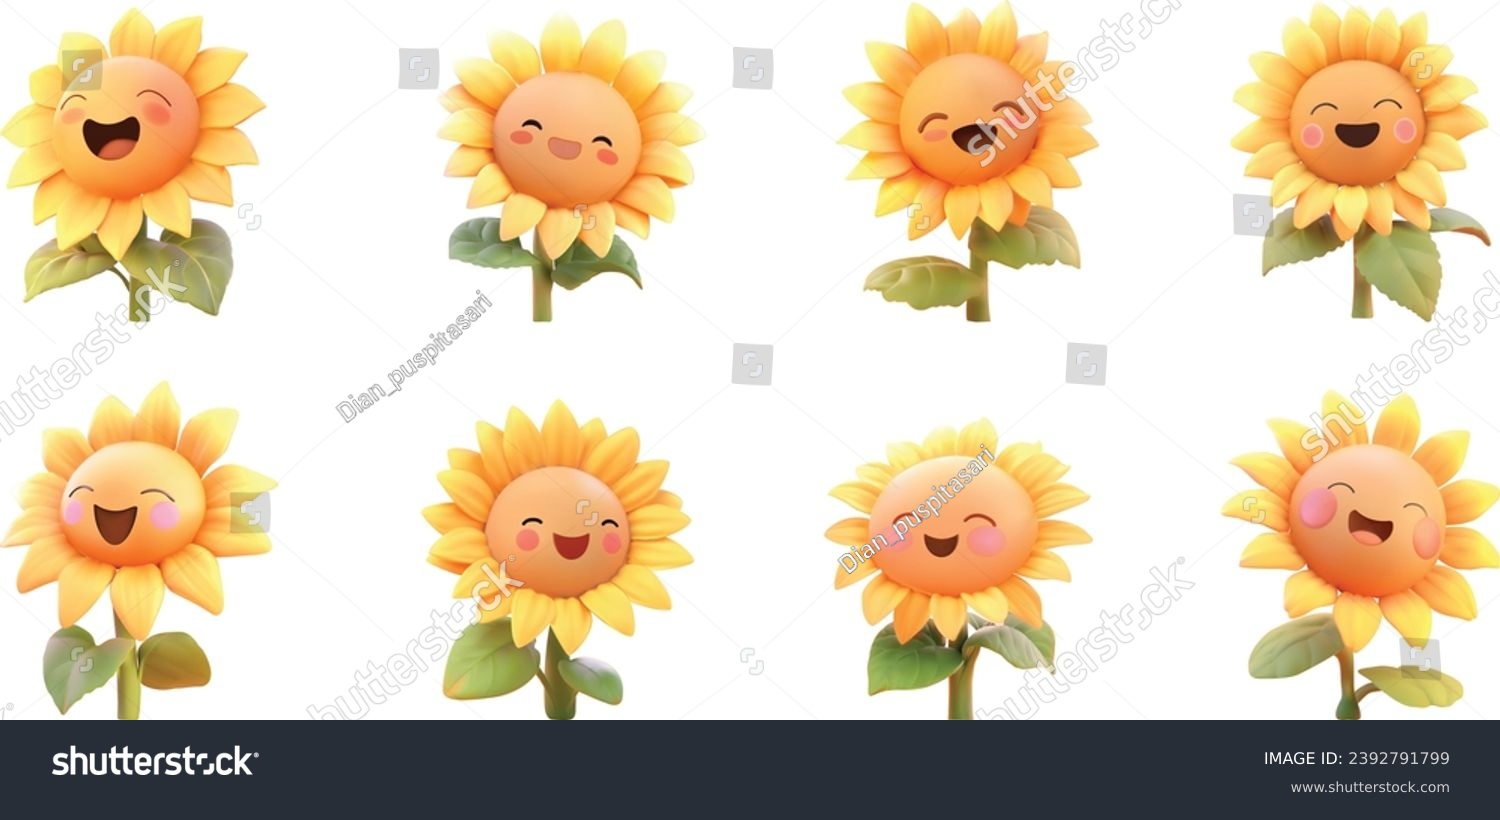 SVG of Clipart 3D Character Vector Cute Sunflower  svg